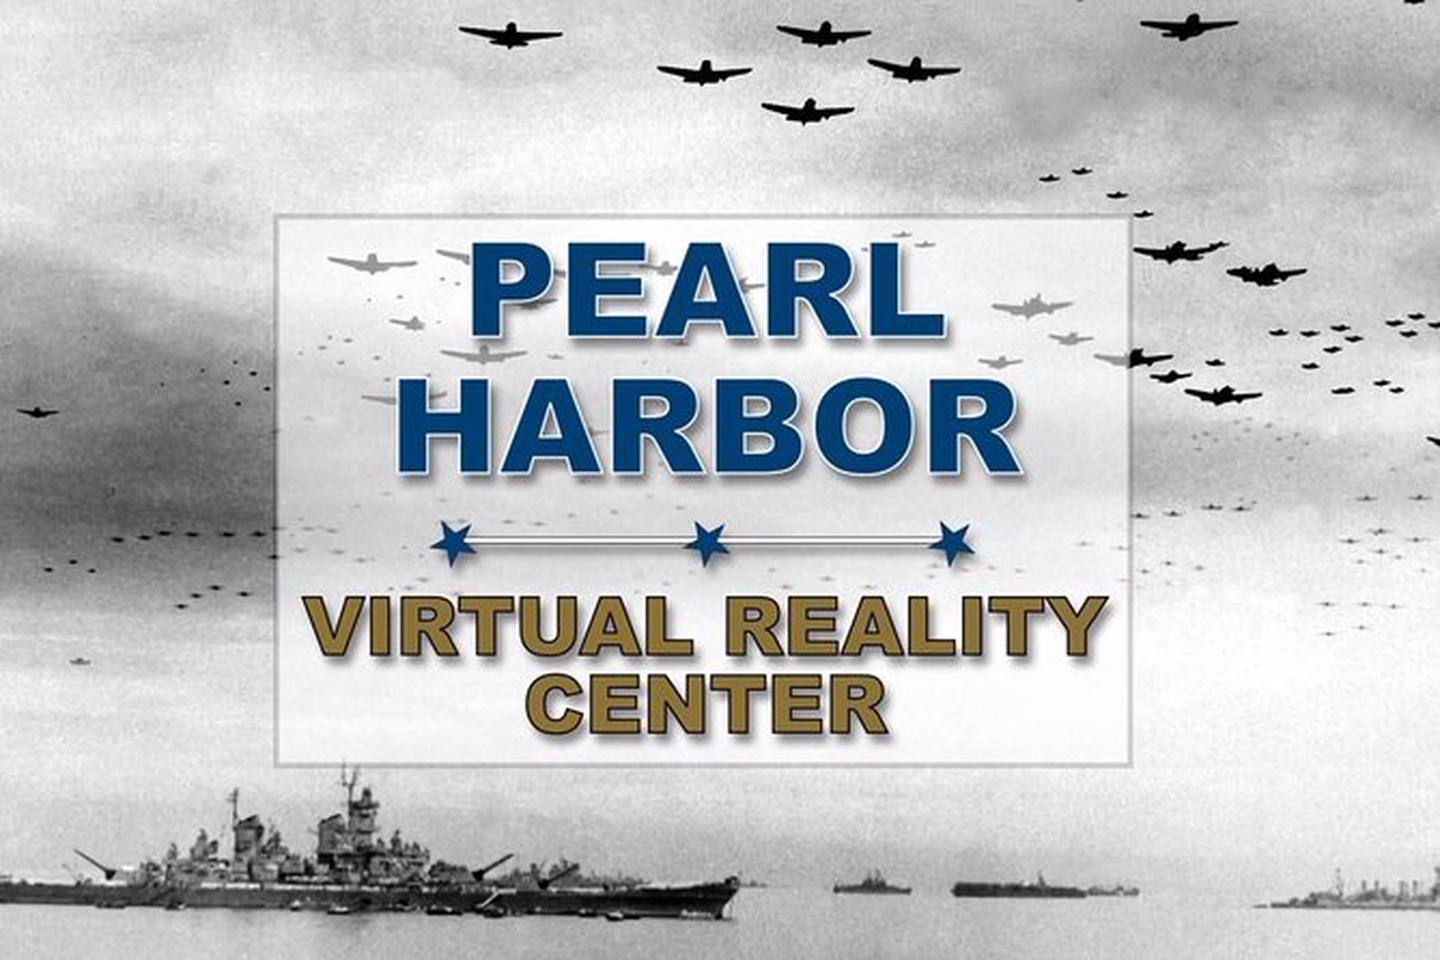 The Pearl Harbor National Memorial Virtual Reality Theater.Pearl Harbor has a brand new Virtual Reality Theater offering four different VR tours at the National Memorial.